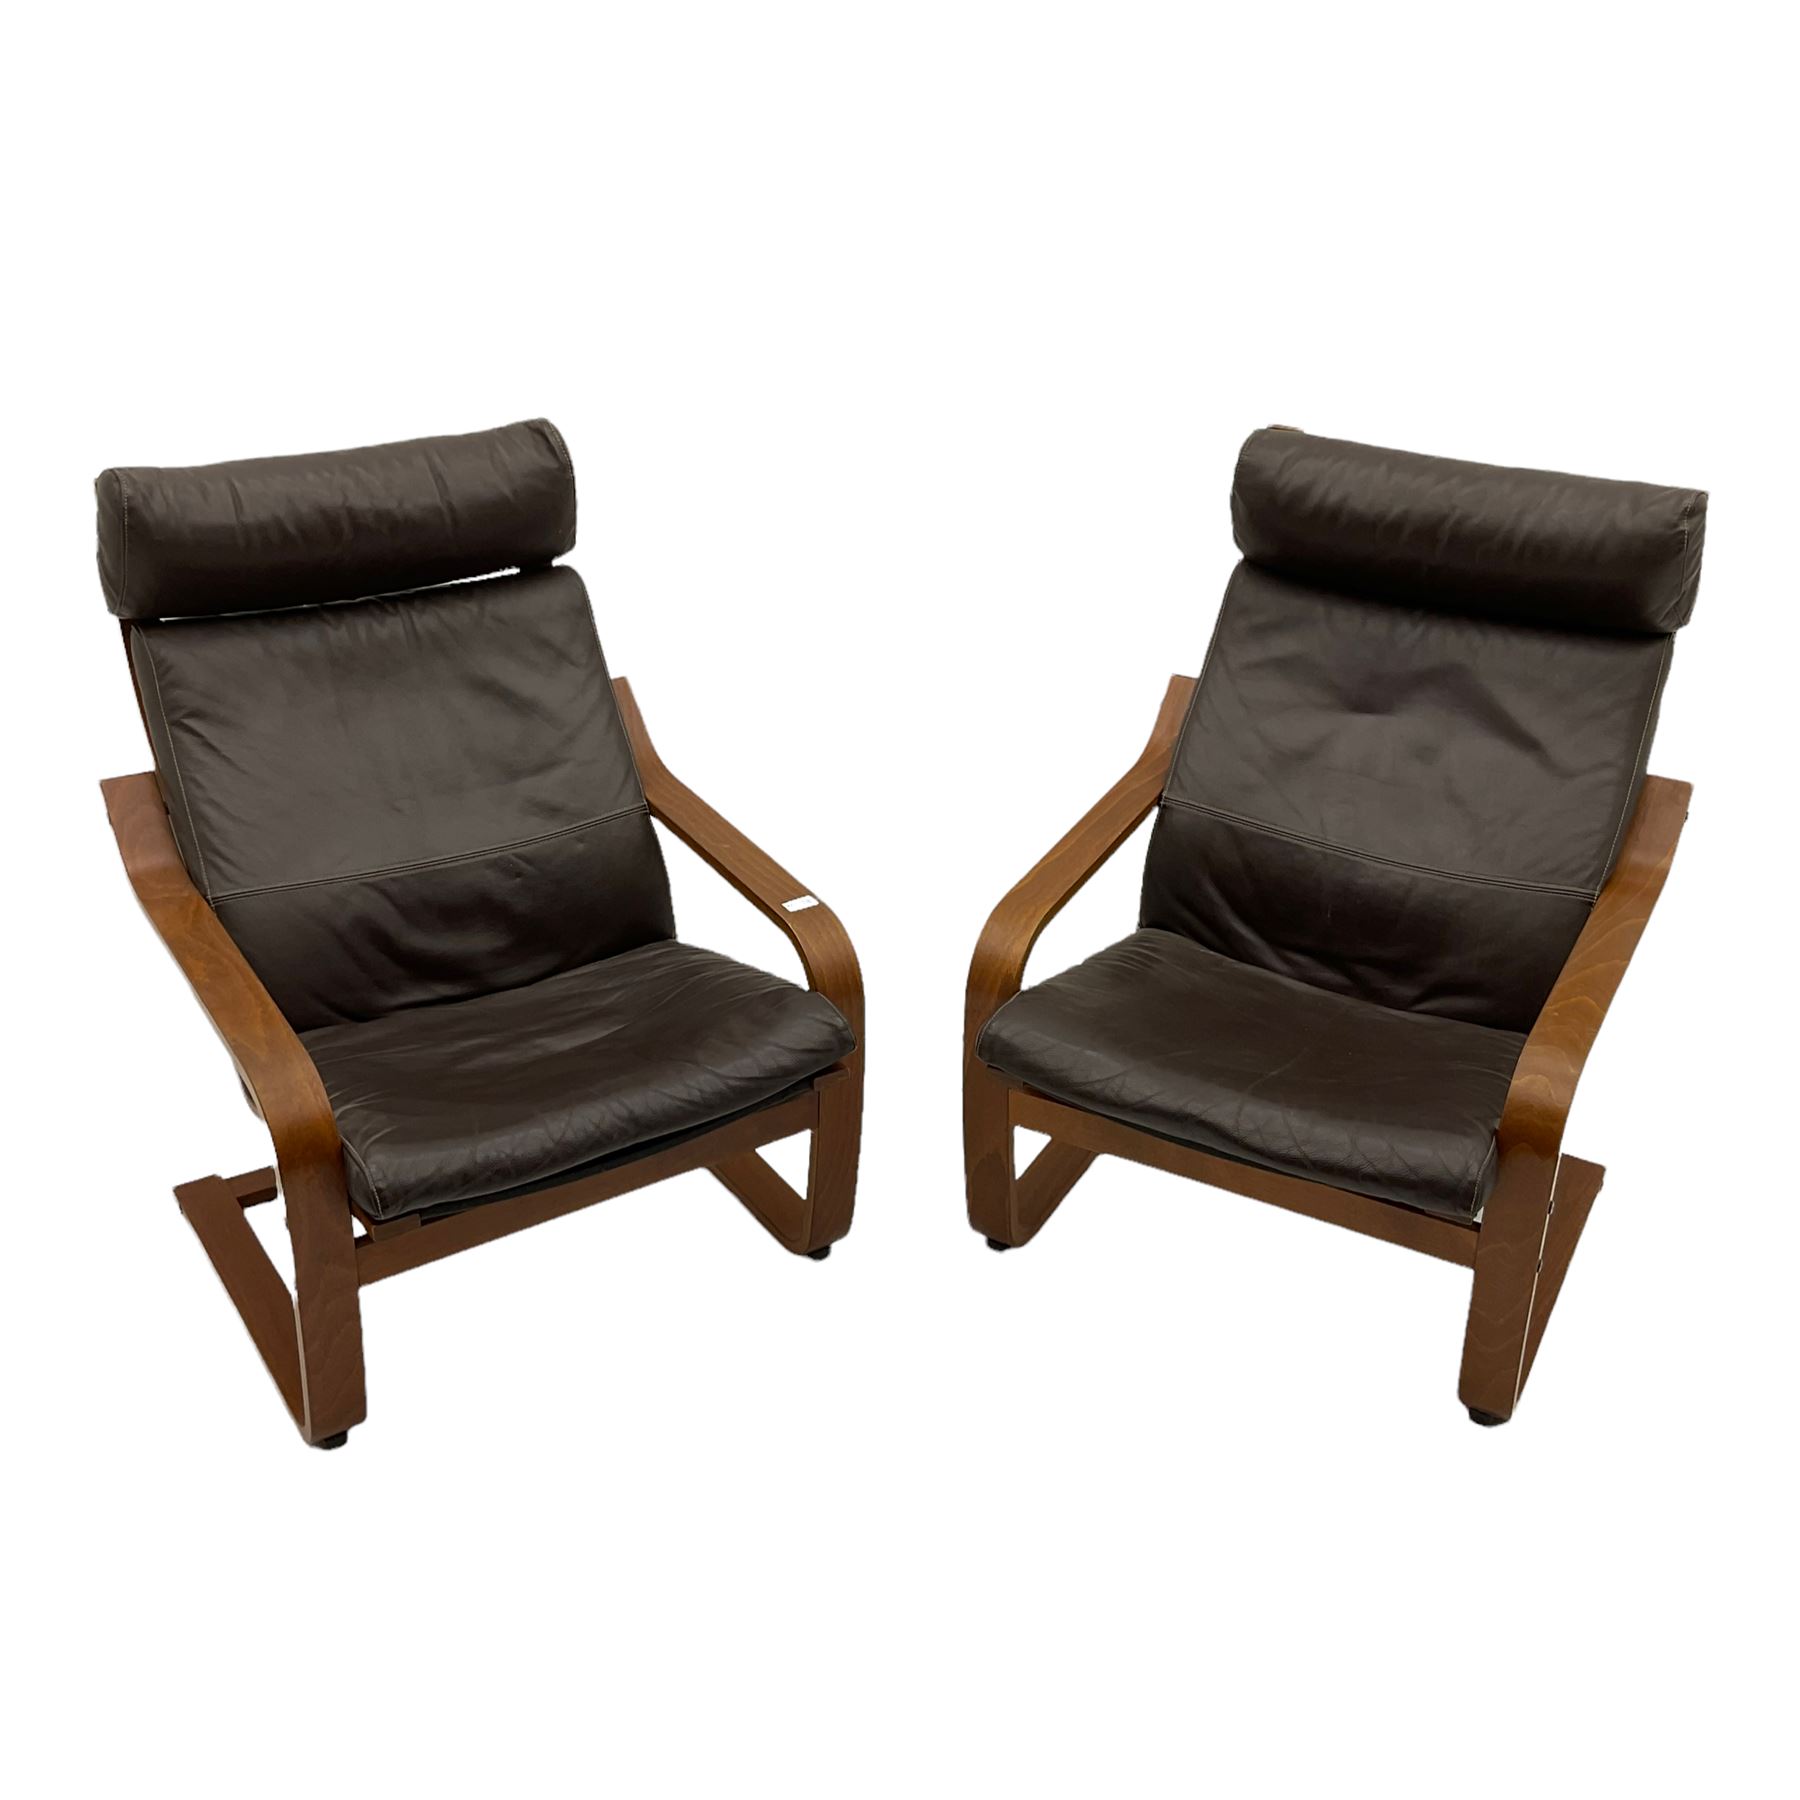 IKEA - Pair of Poang armchairs